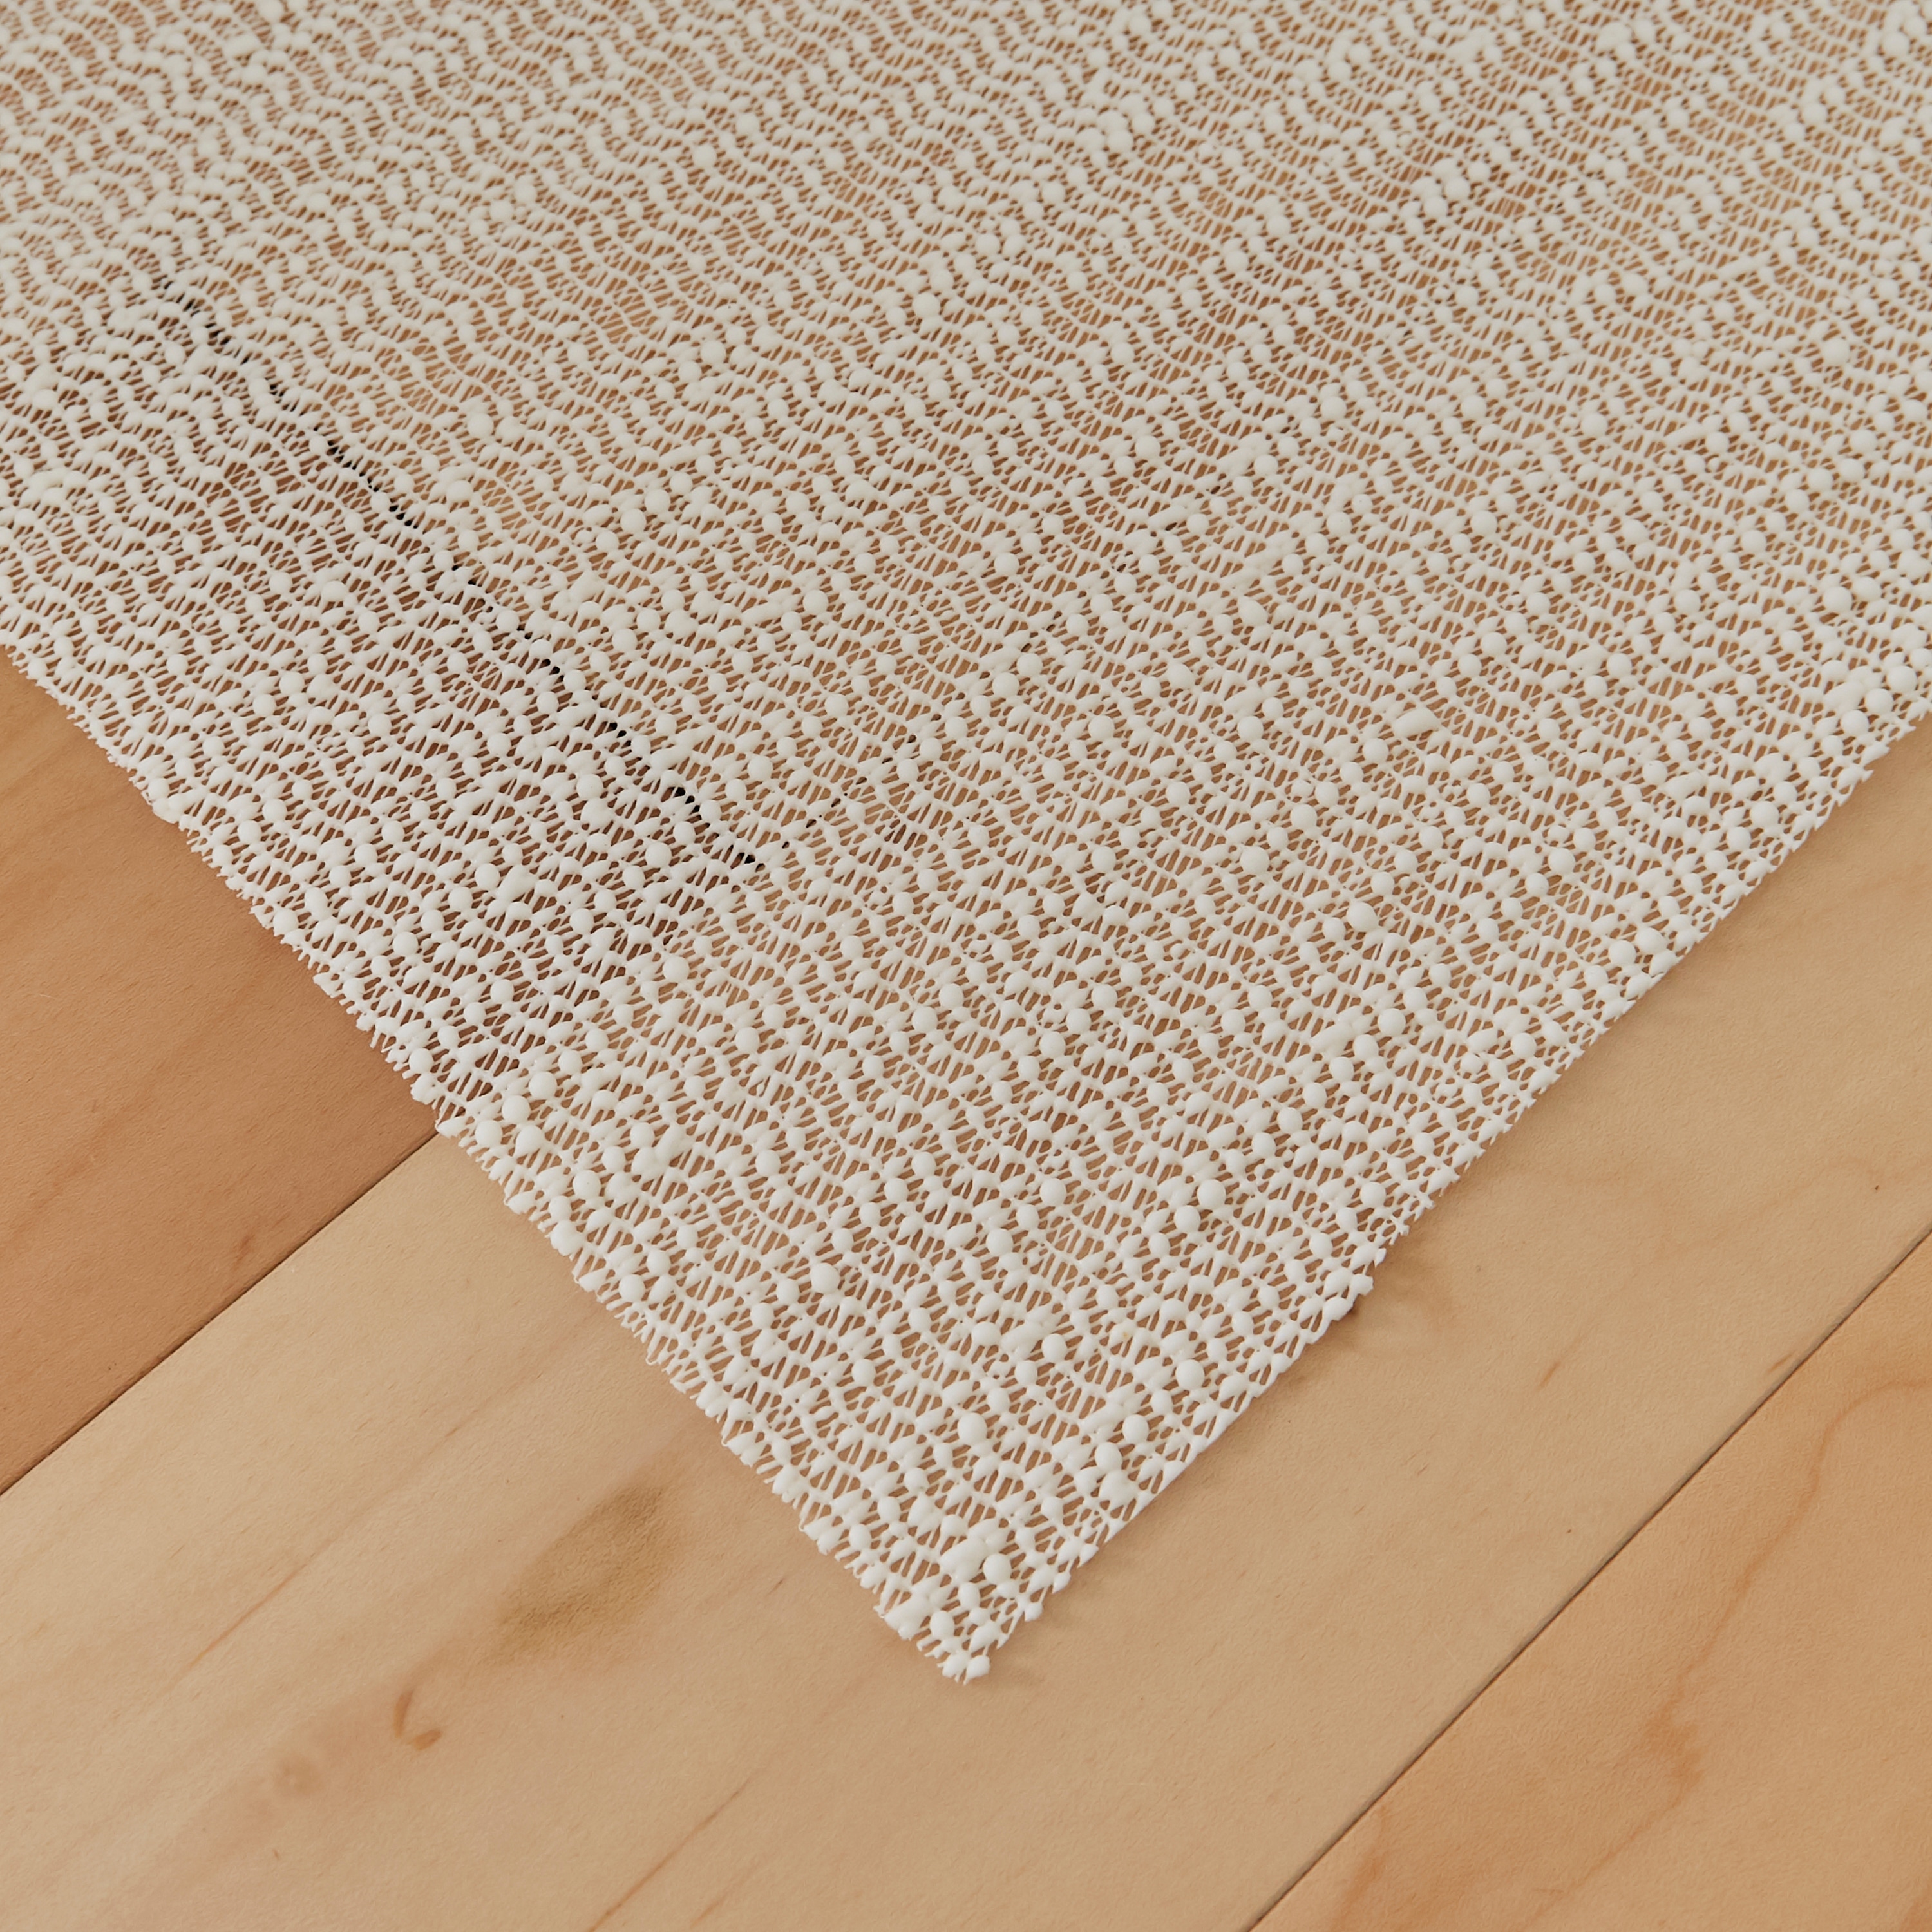 https://ak1.ostkcdn.com/images/products/is/images/direct/8b011c71d05dbab3f027229f7cf793311ea8e658/Mohawk-Home-Hold-Fast-Area-Rug-Gripper.jpg